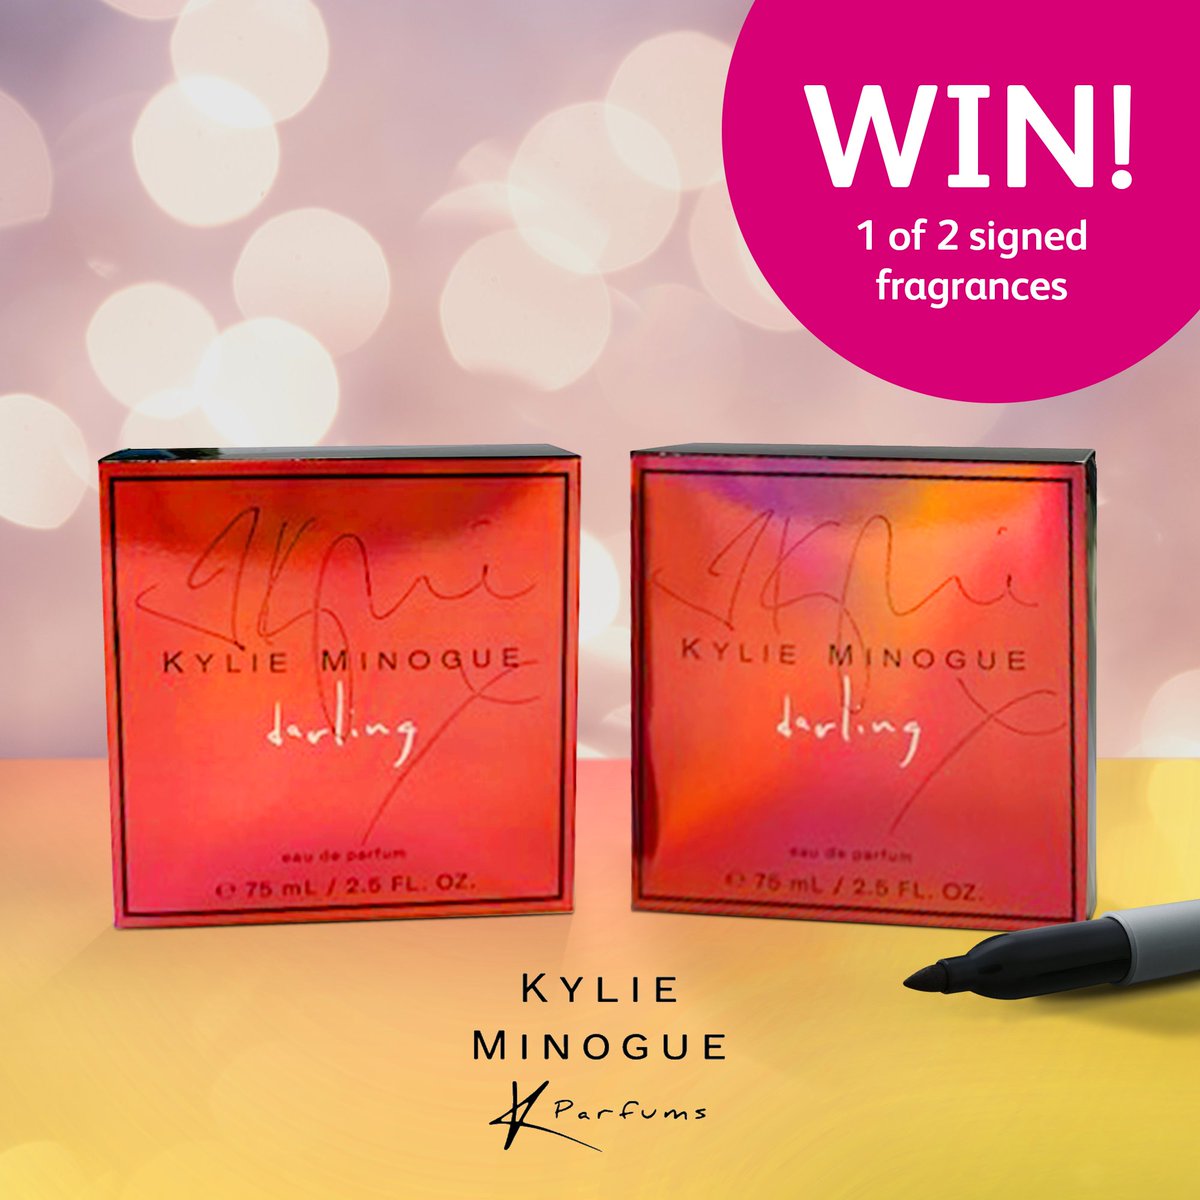 #WIN – 1 of 2 SIGNED @kylieminogue fragrances! To enter: - Follow us - Like & RT - Tag a friend! Entries close on Sunday 15th May at 11:59pm. The winners will be contacted on Monday 16th May. You can find our T&Cs here: bit.ly/3y5OXNk GOOD LUCK!